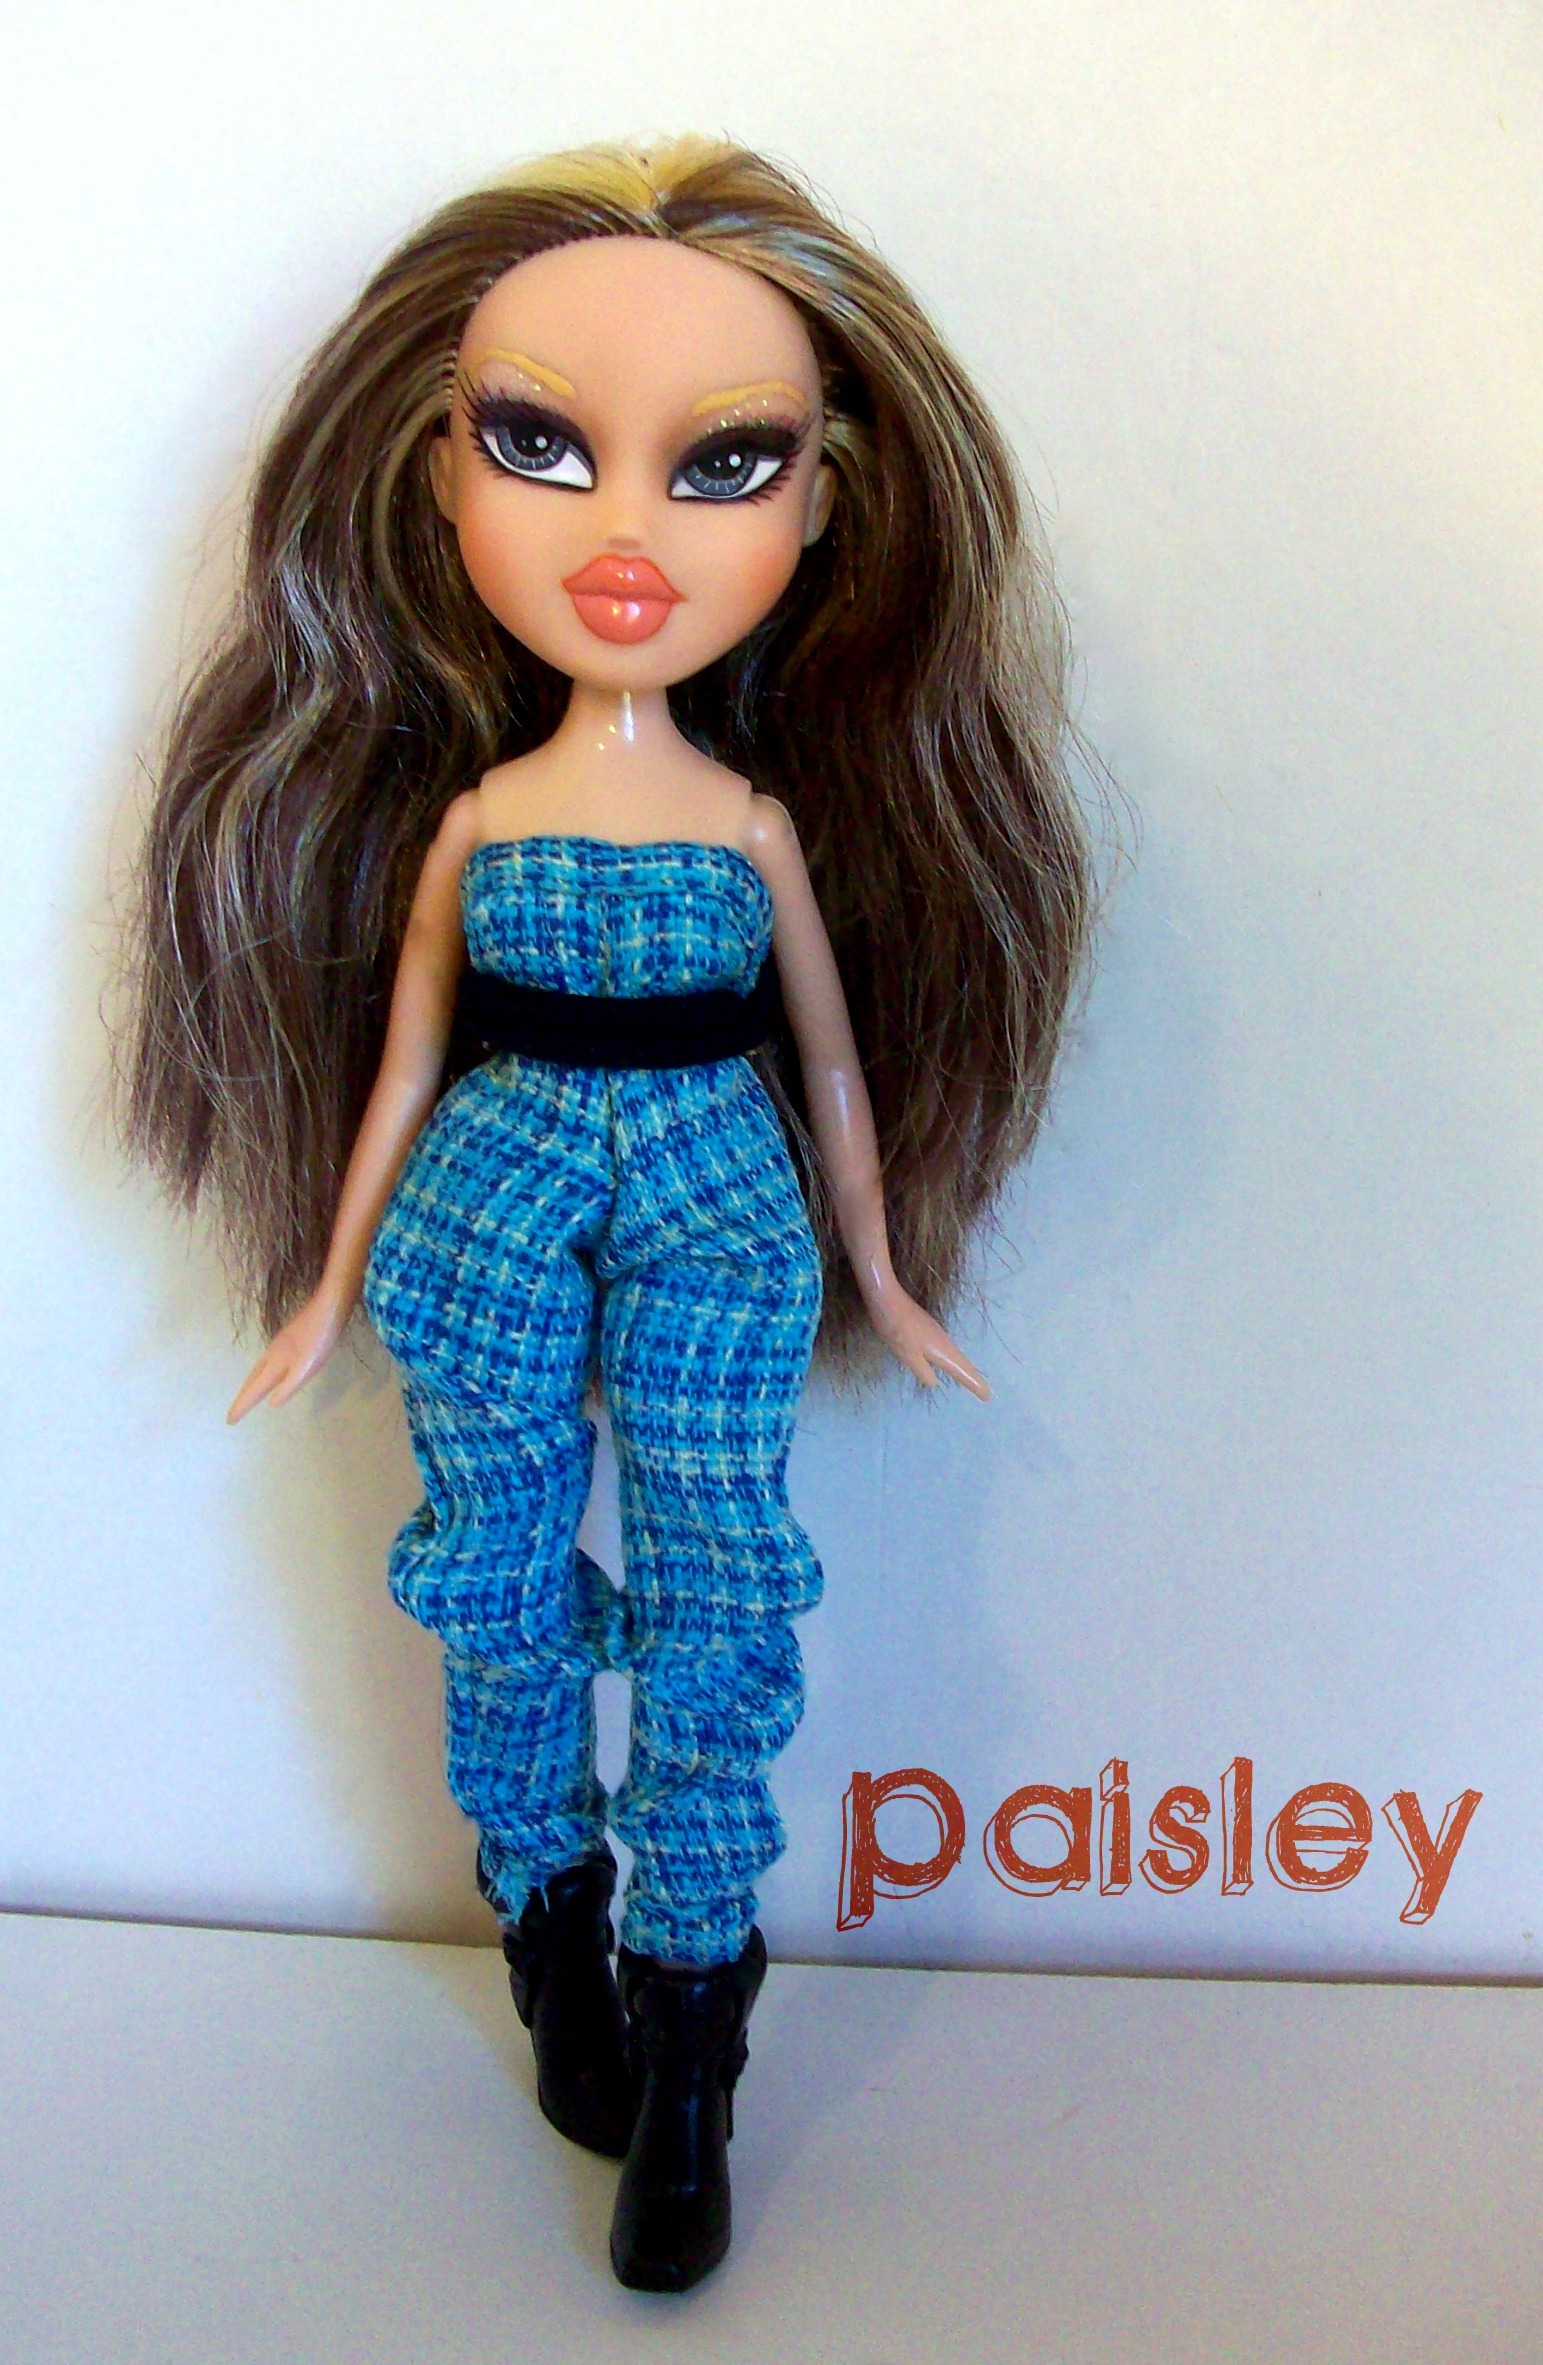 the doll is wearing blue pants with an open top